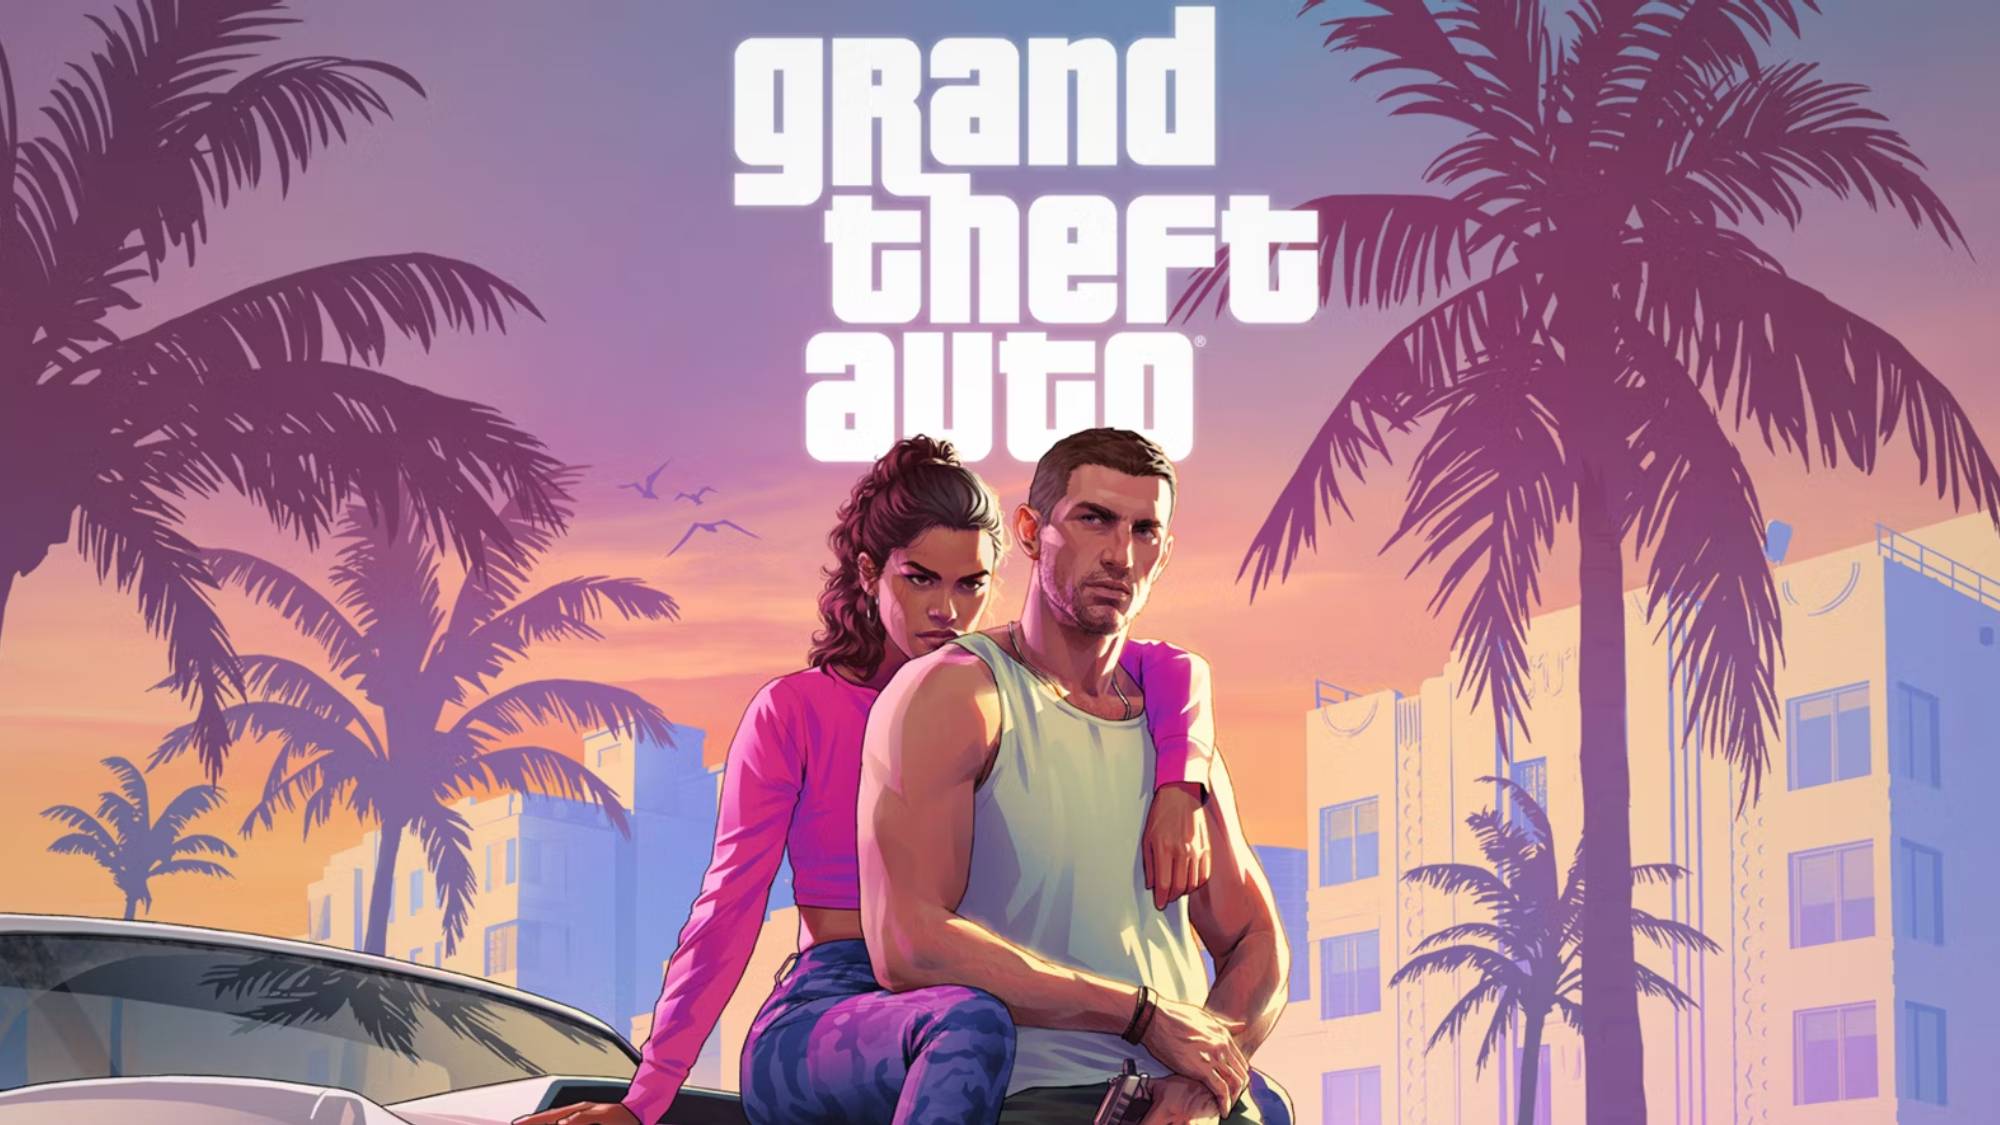 What makes GTA 6's gameplay longer than Red Dead Redemption 2's despite potentially having a shorter main story length?